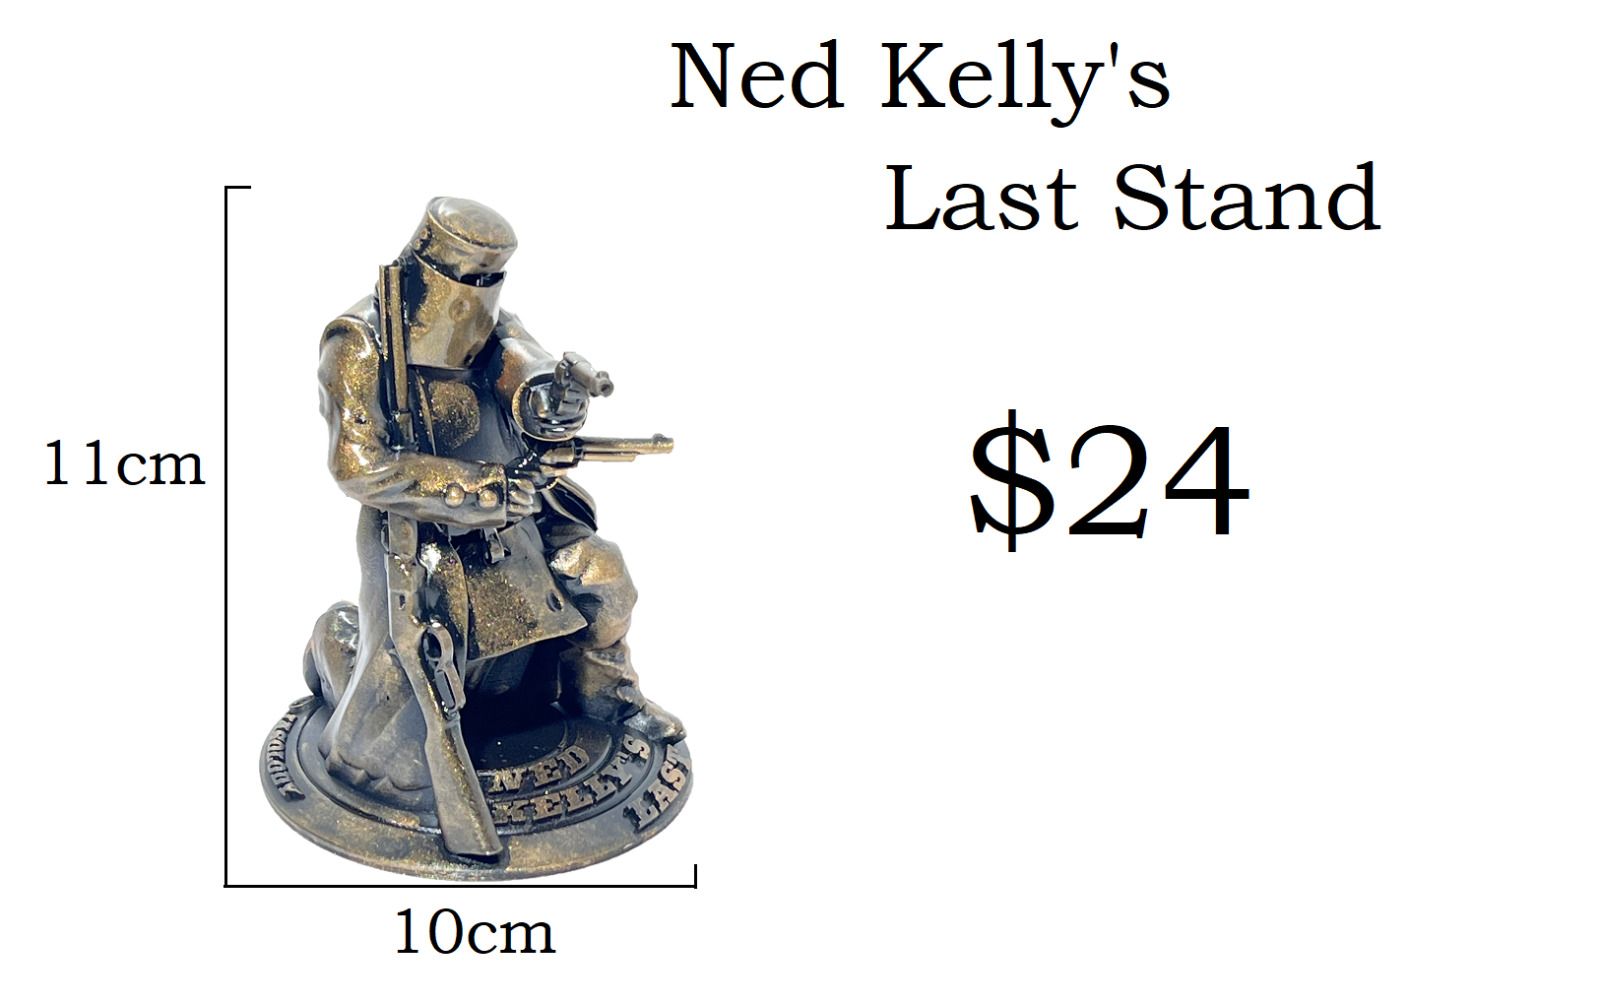 NED KELLY LAST STAND DISPLAY STATUE Such is Life Australian Legends